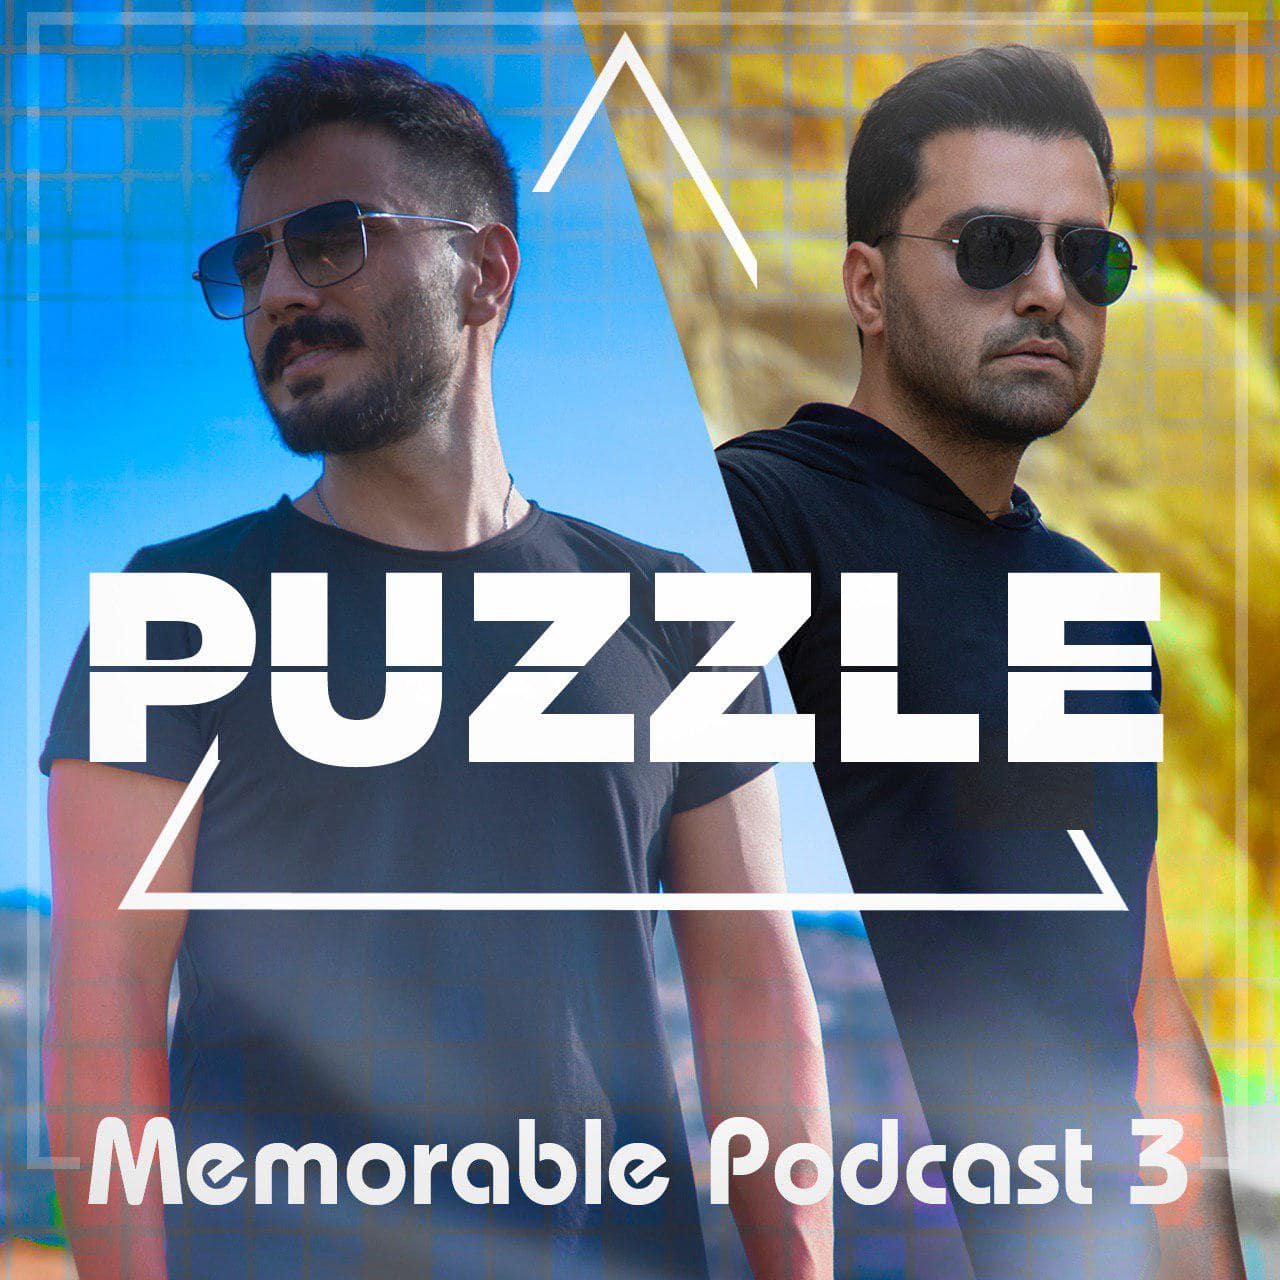 Puzzle Band Memorable Podcast 3 